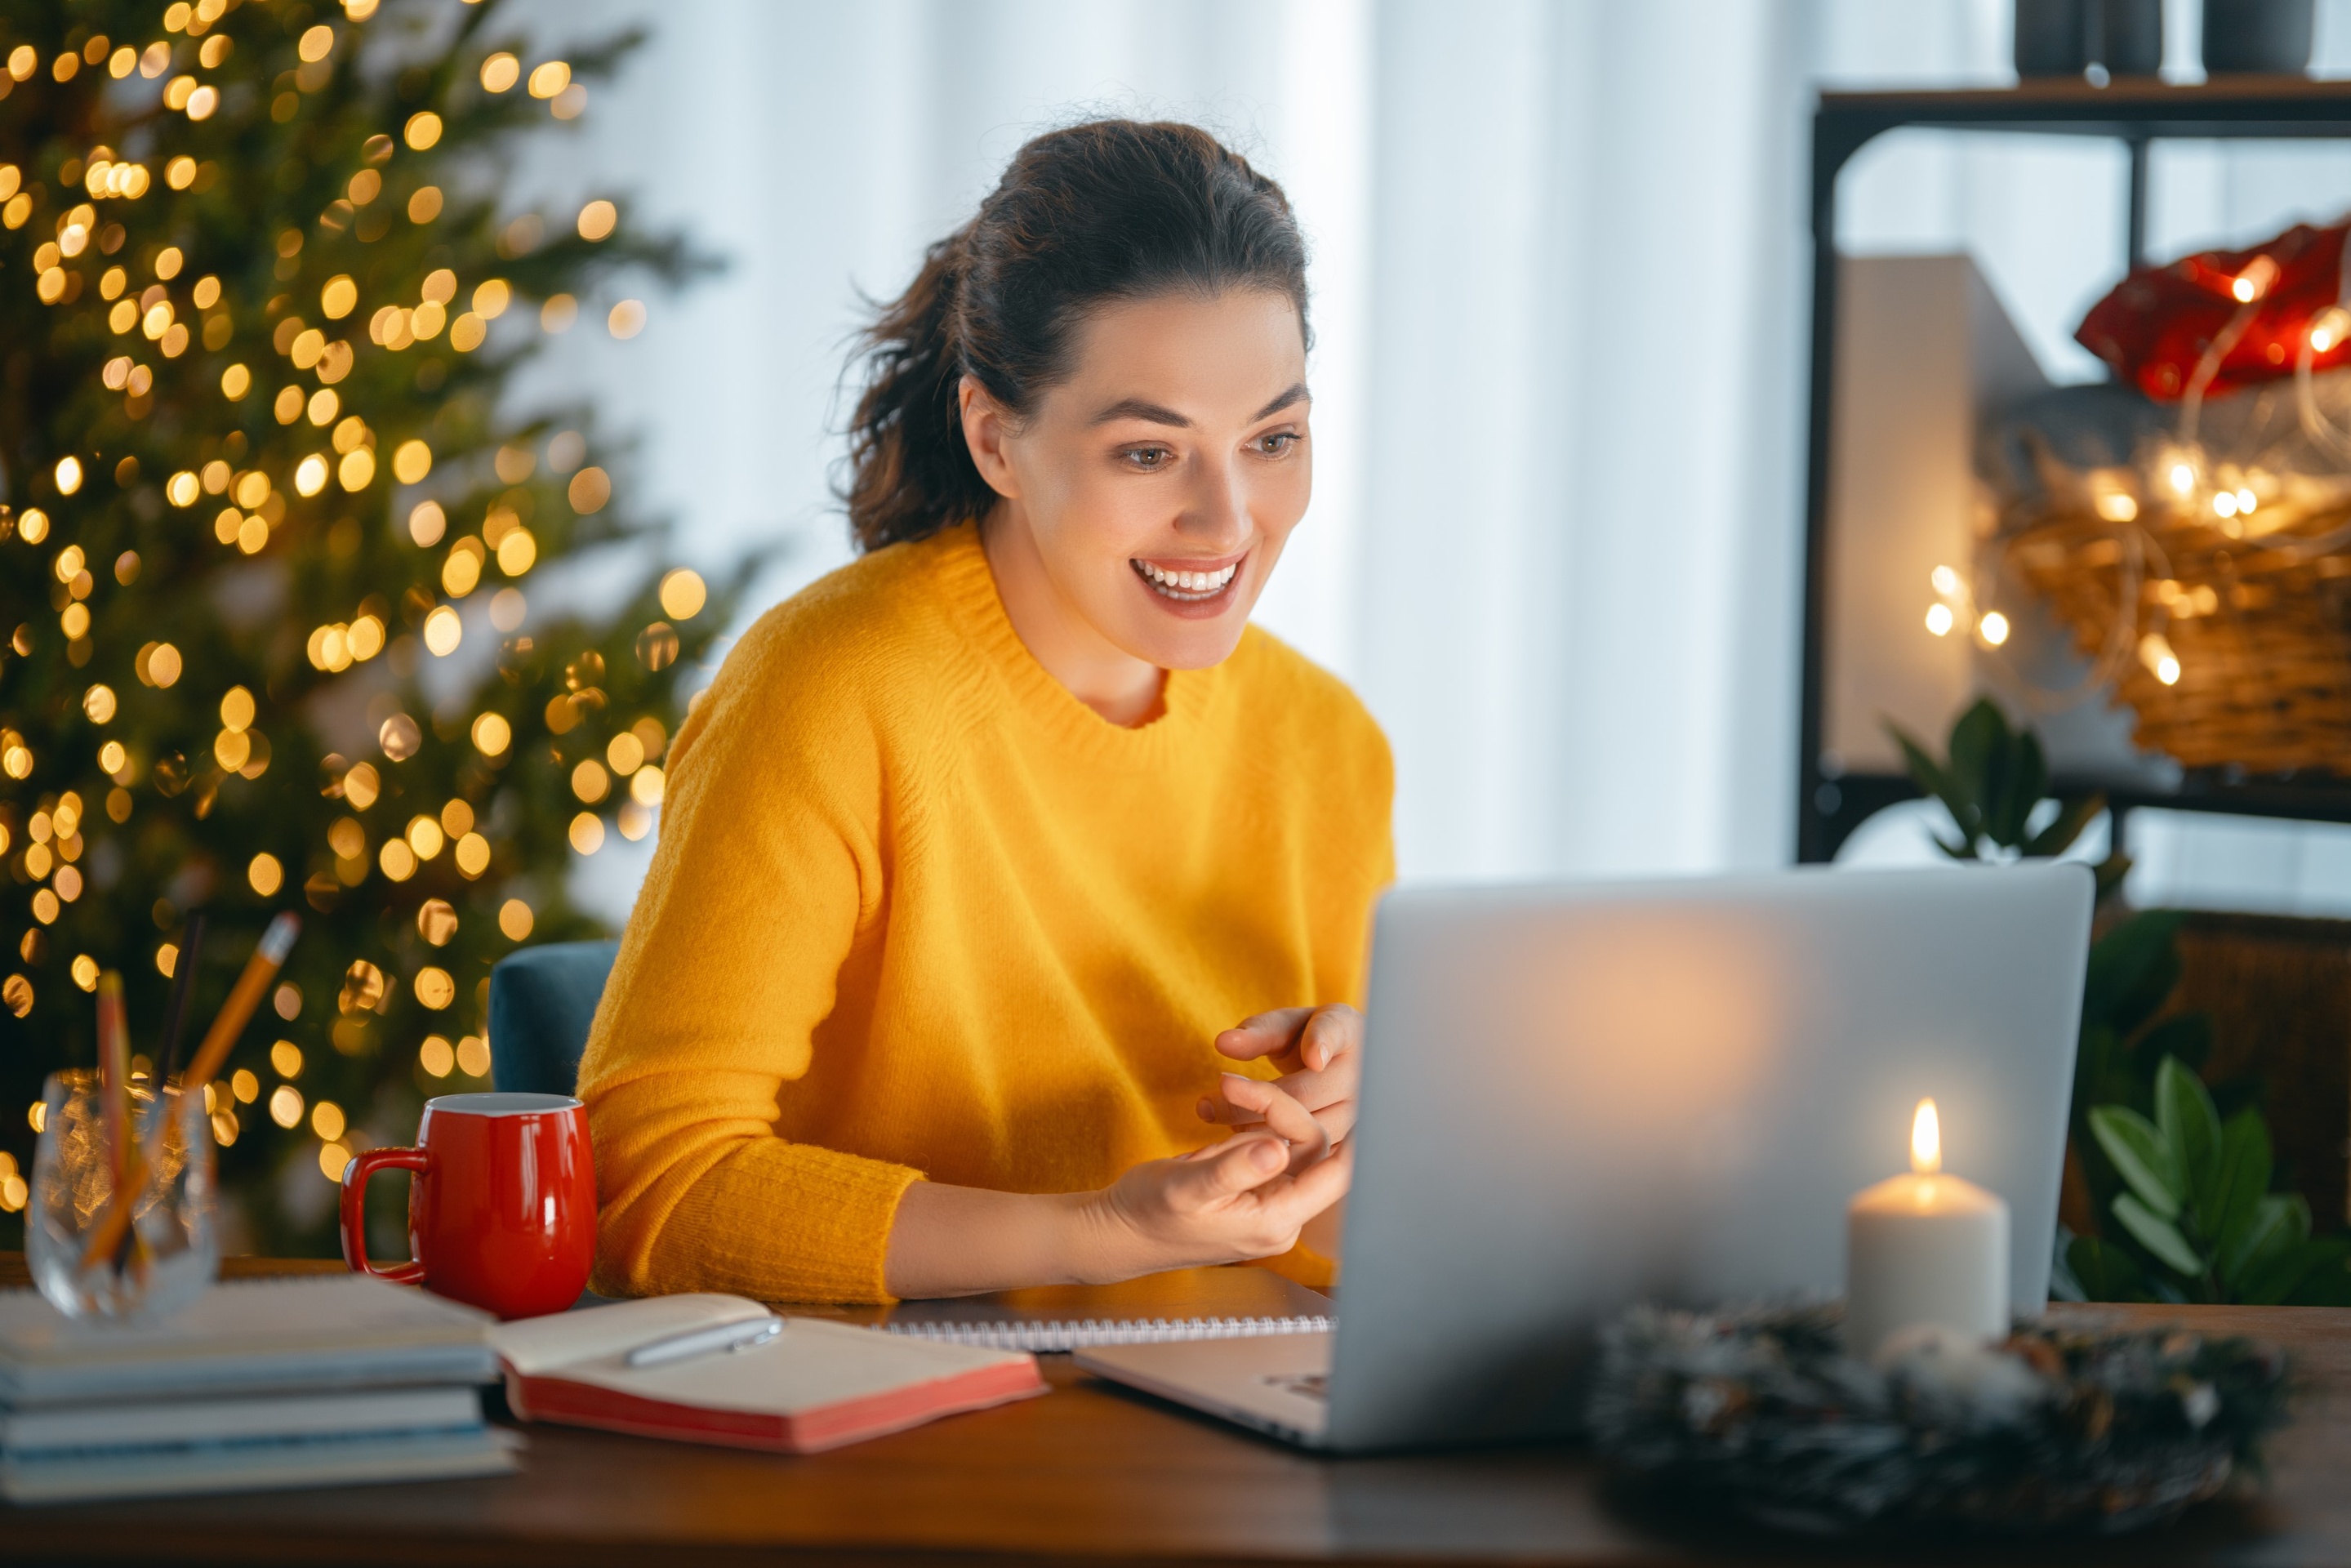 Woman working in home office before Christmas